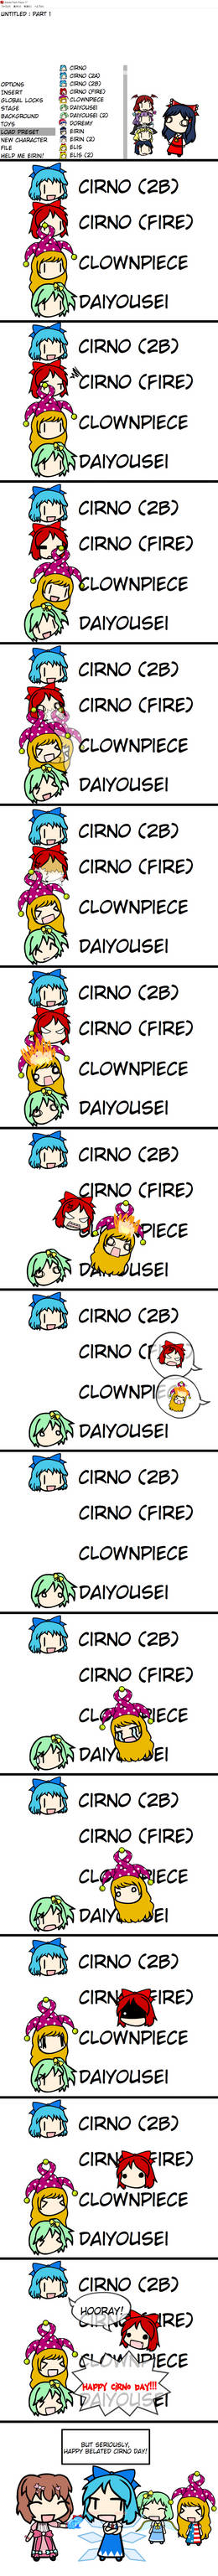 Happy Belated Cirno Day!